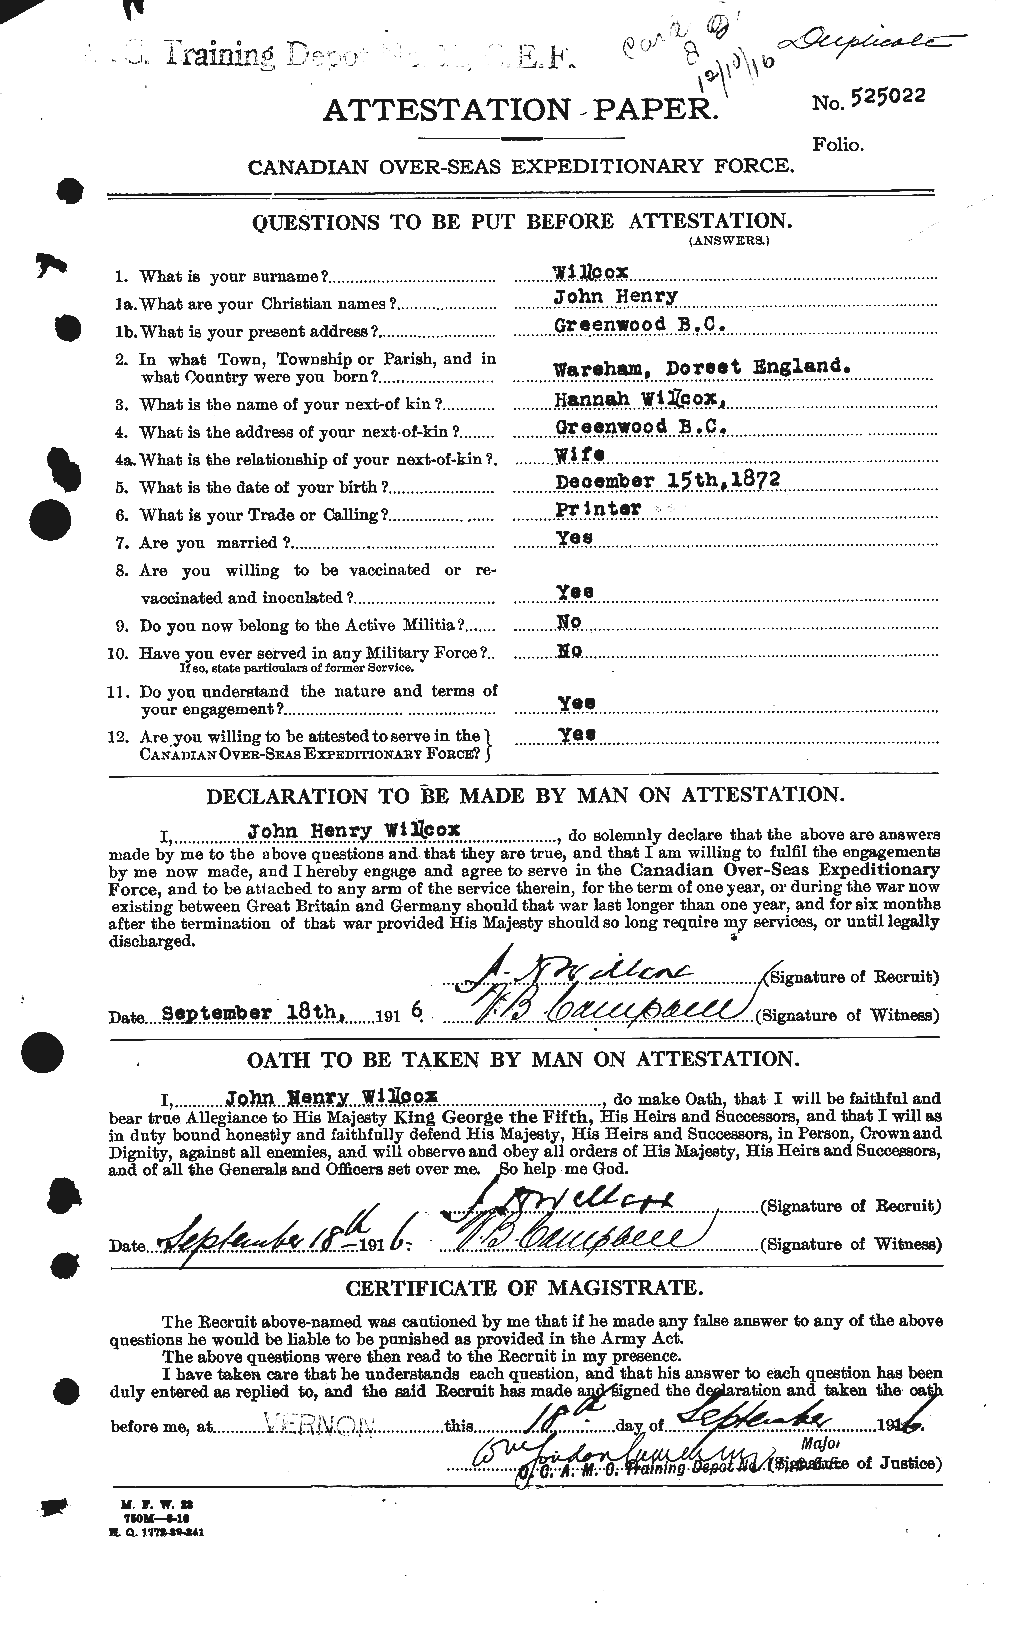 Personnel Records of the First World War - CEF 675246a